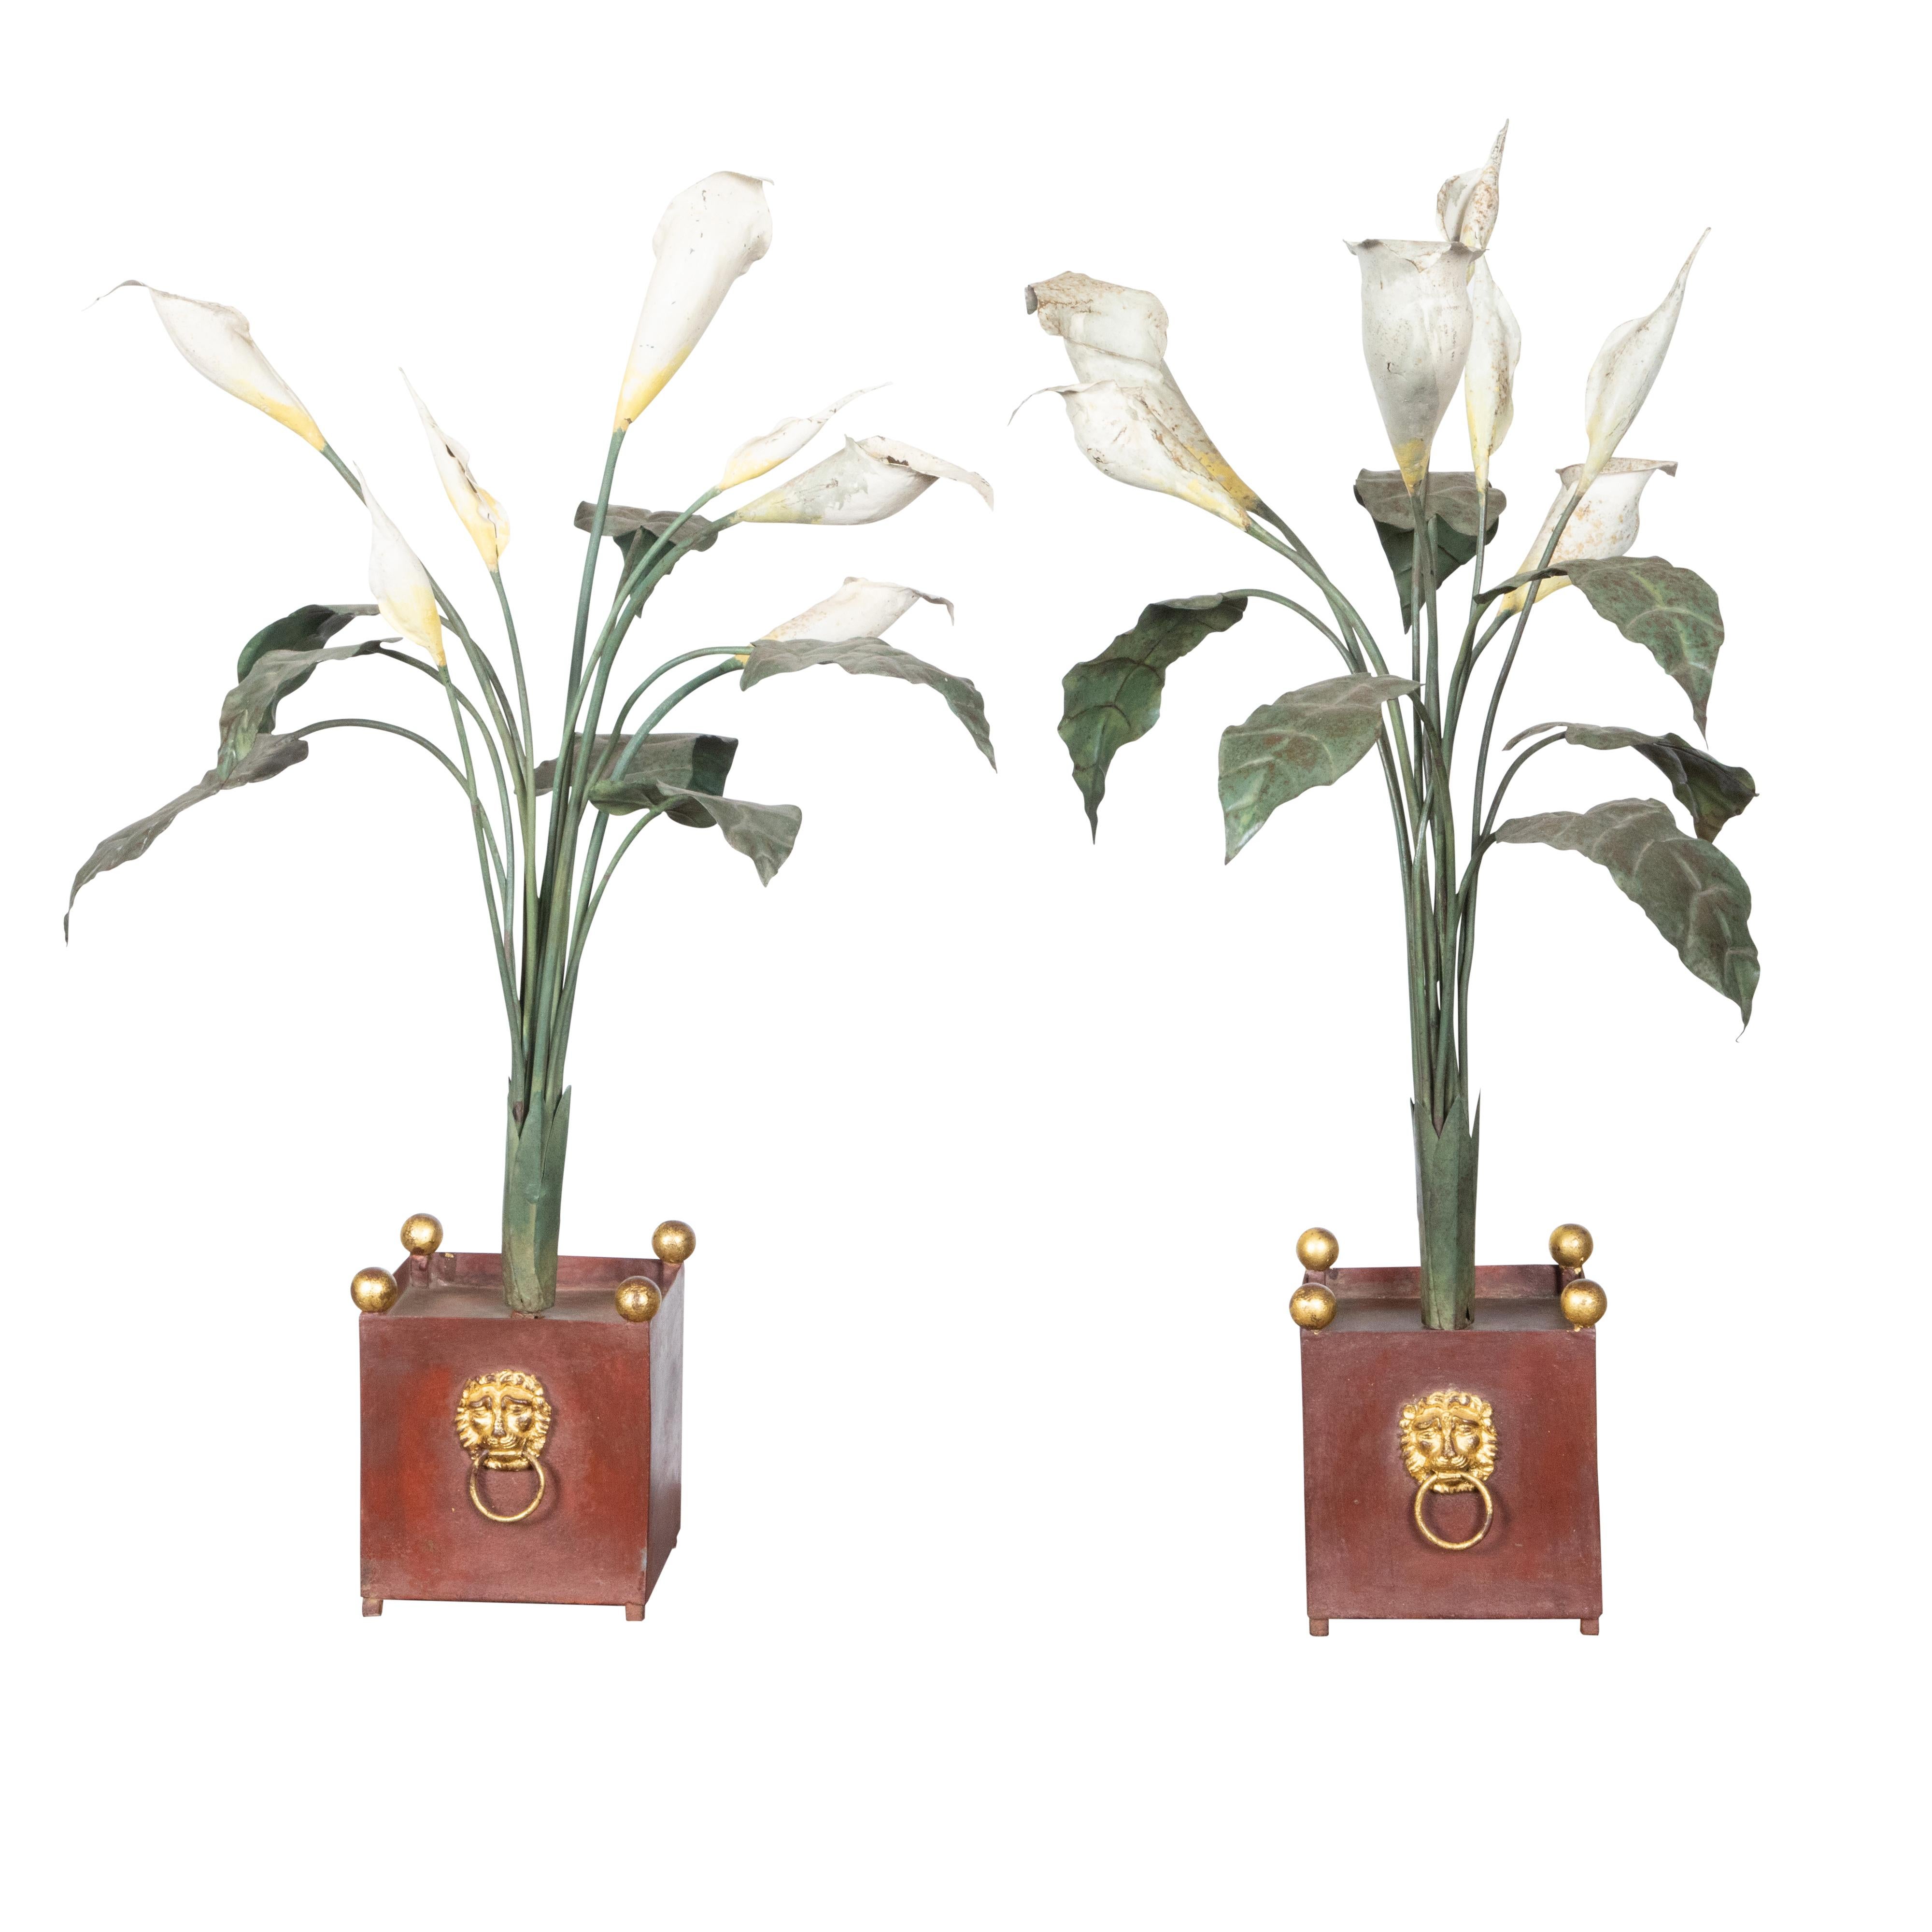 20th Century Pair of Italian 1930s Tôle Calla Lillies Sculptures in Red and Gold Containers For Sale